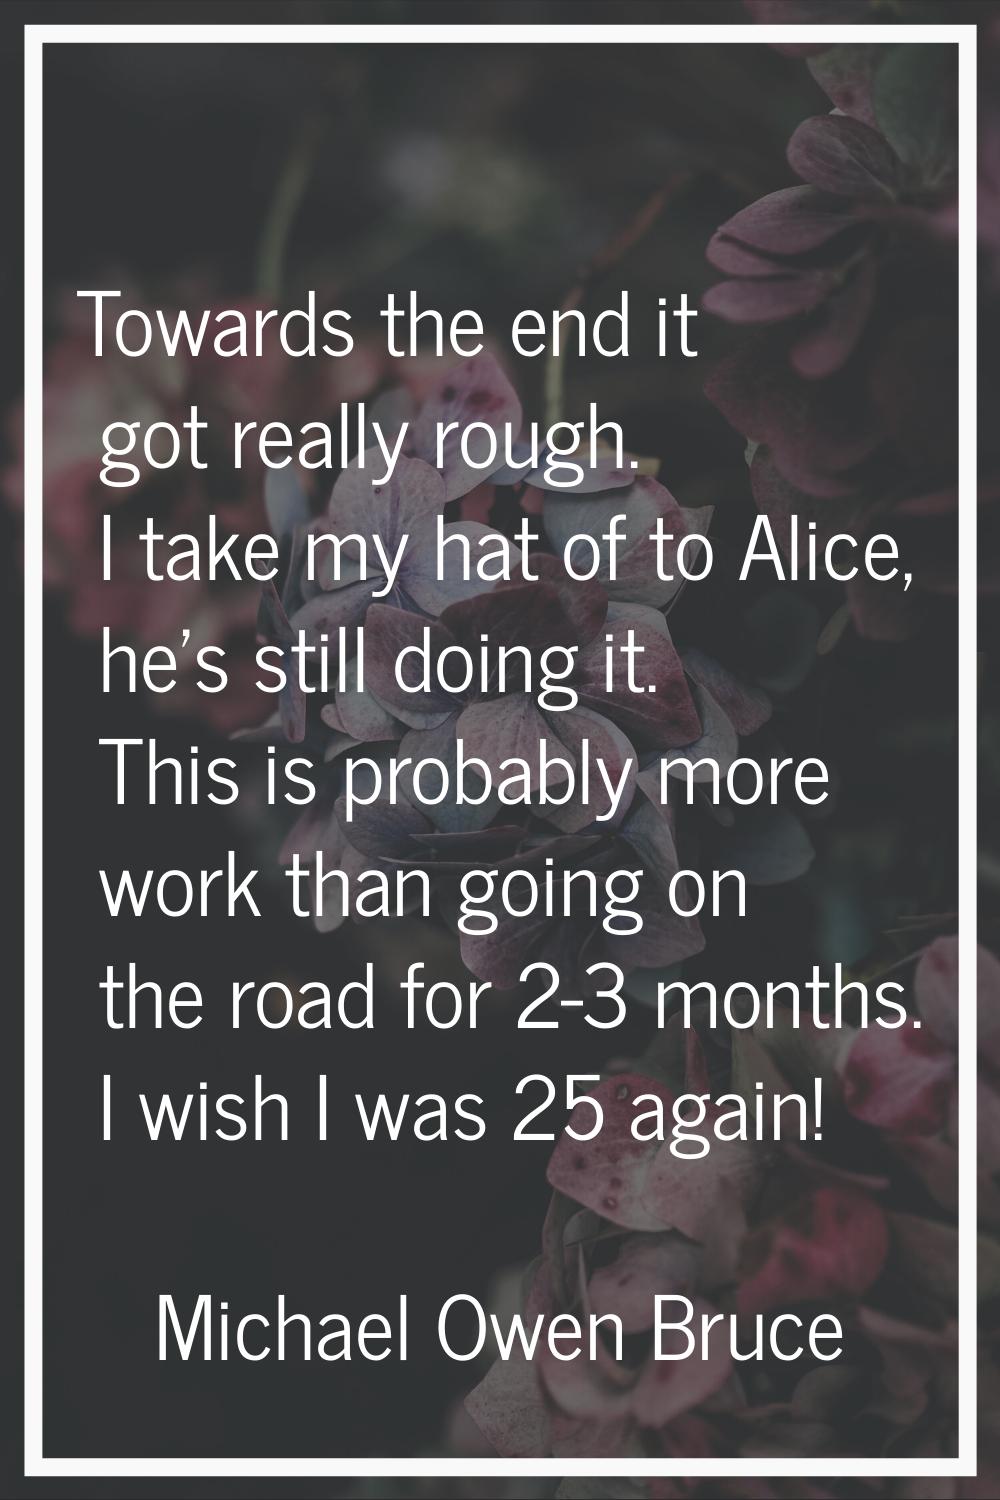 Towards the end it got really rough. I take my hat of to Alice, he's still doing it. This is probab